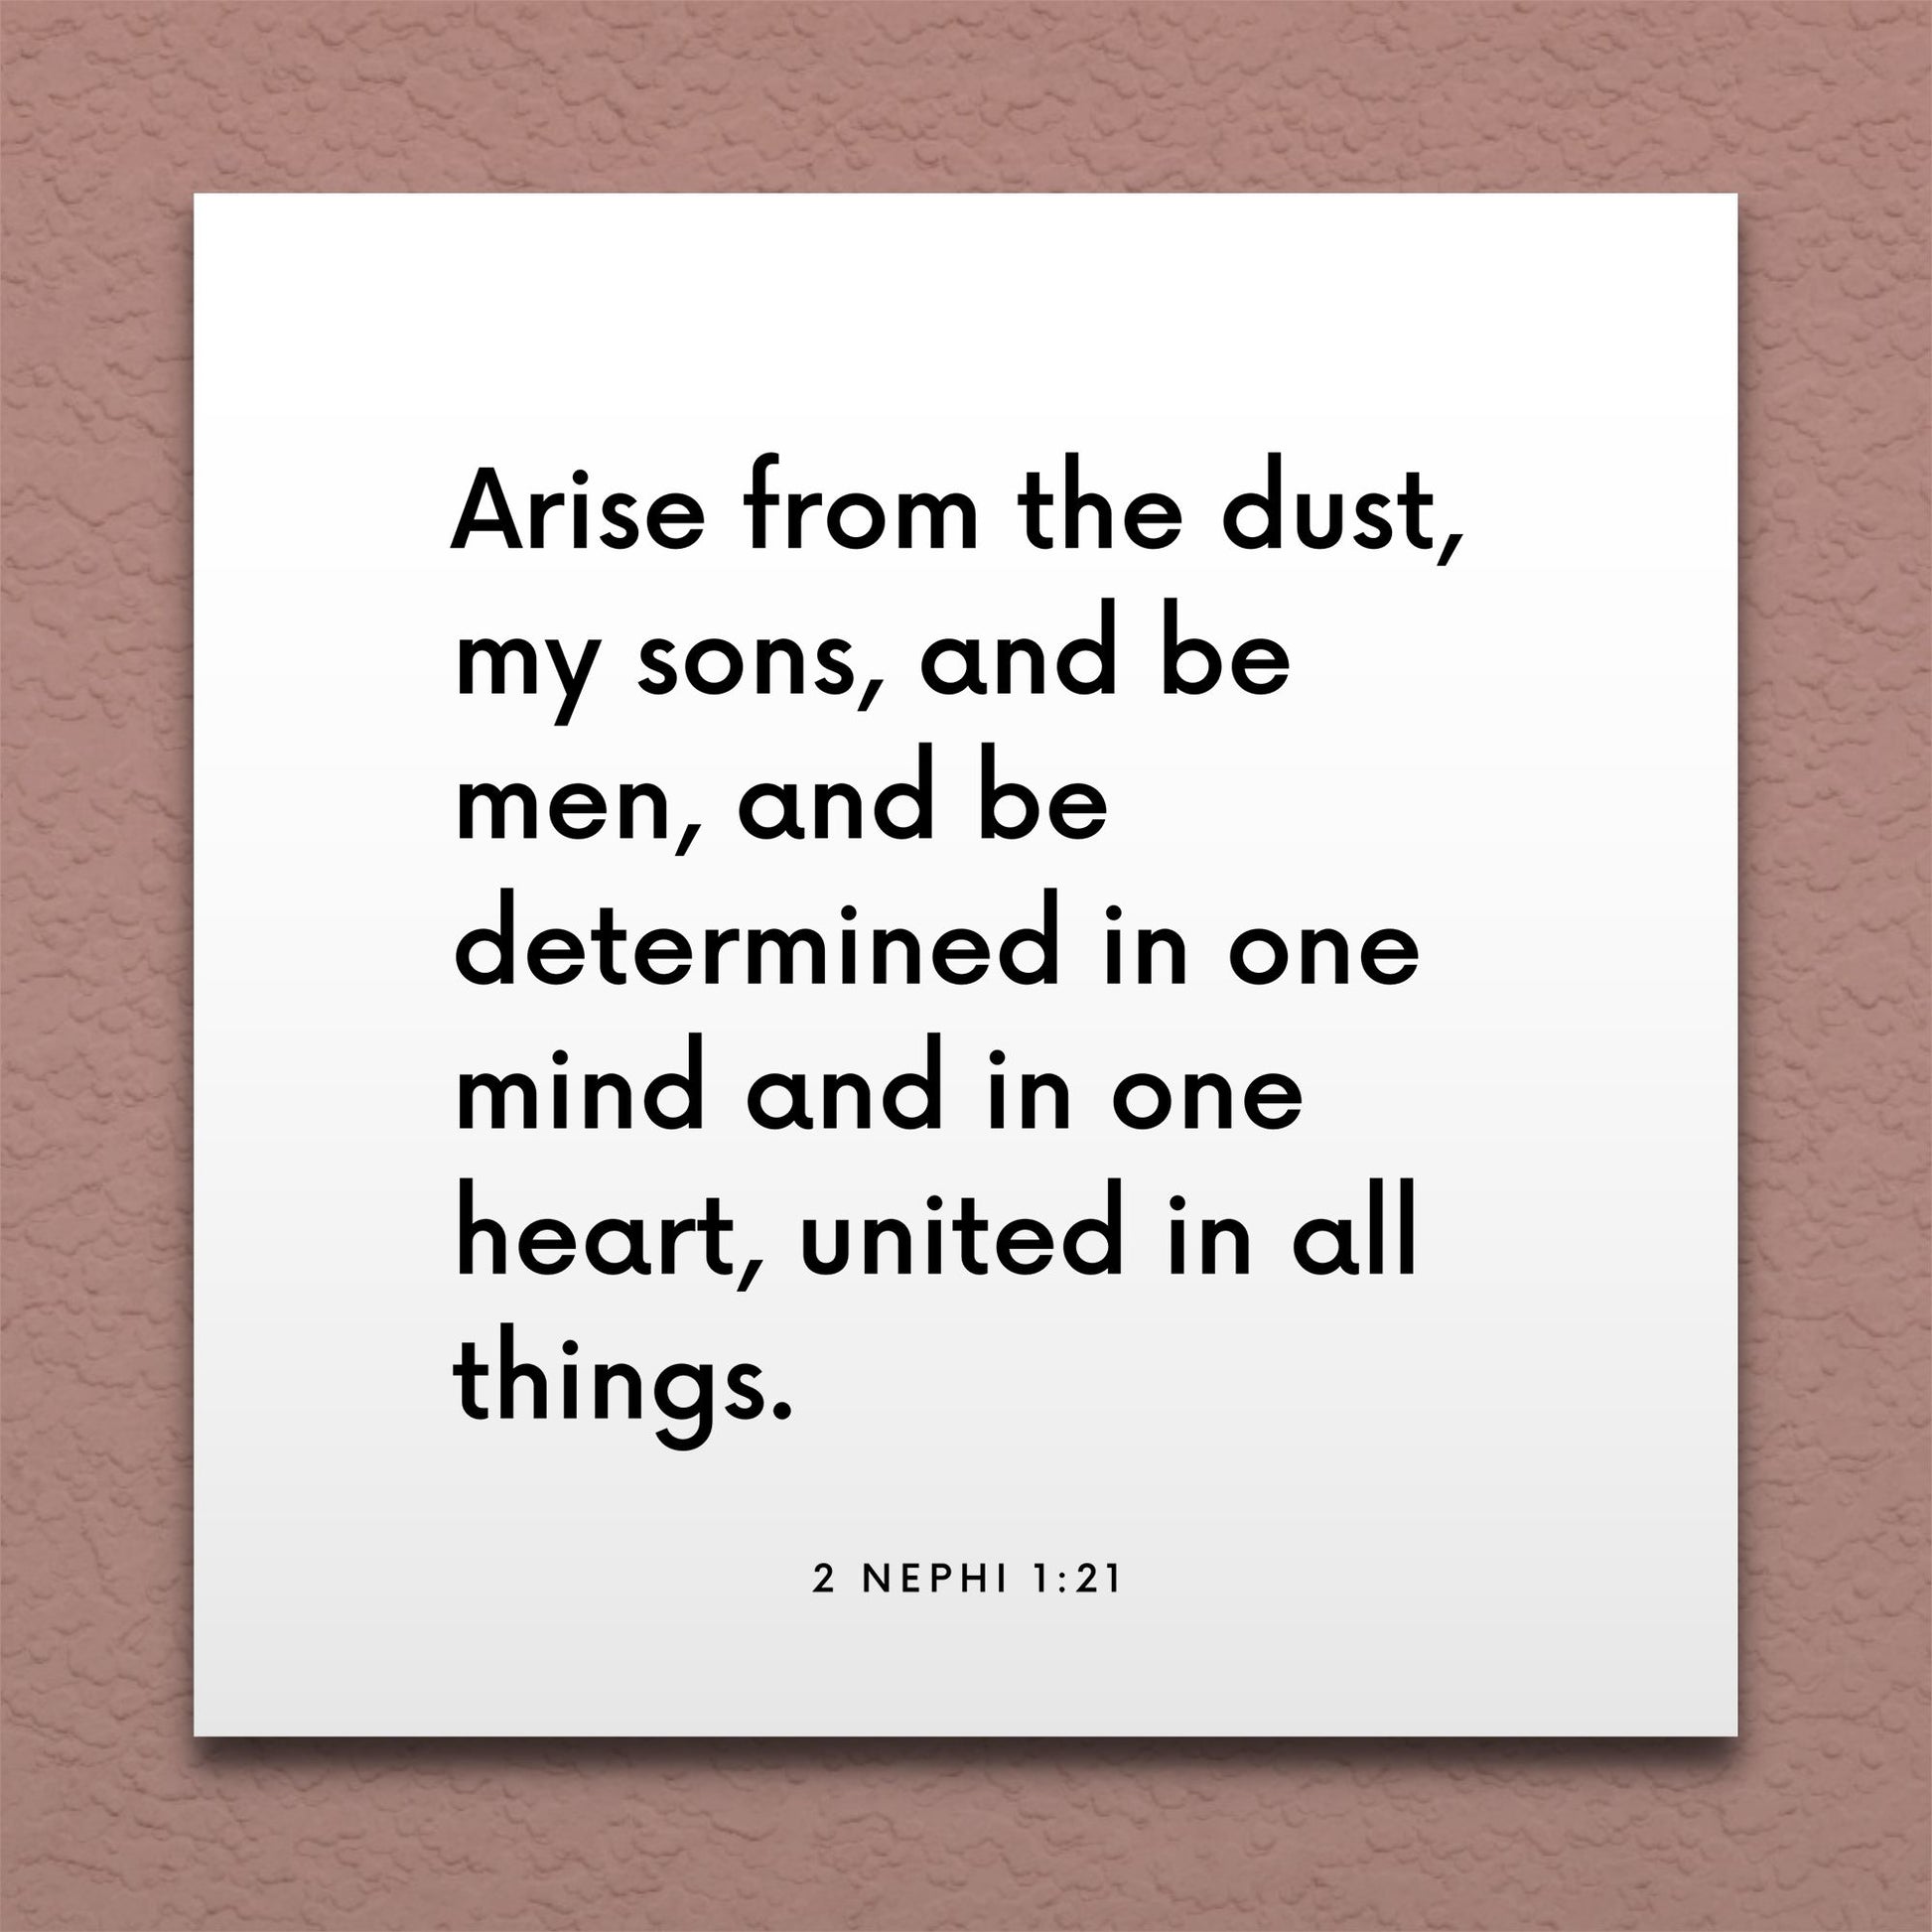 Wall-mounted scripture tile for 2 Nephi 1:21 - "Arise from the dust, my sons, and be men"